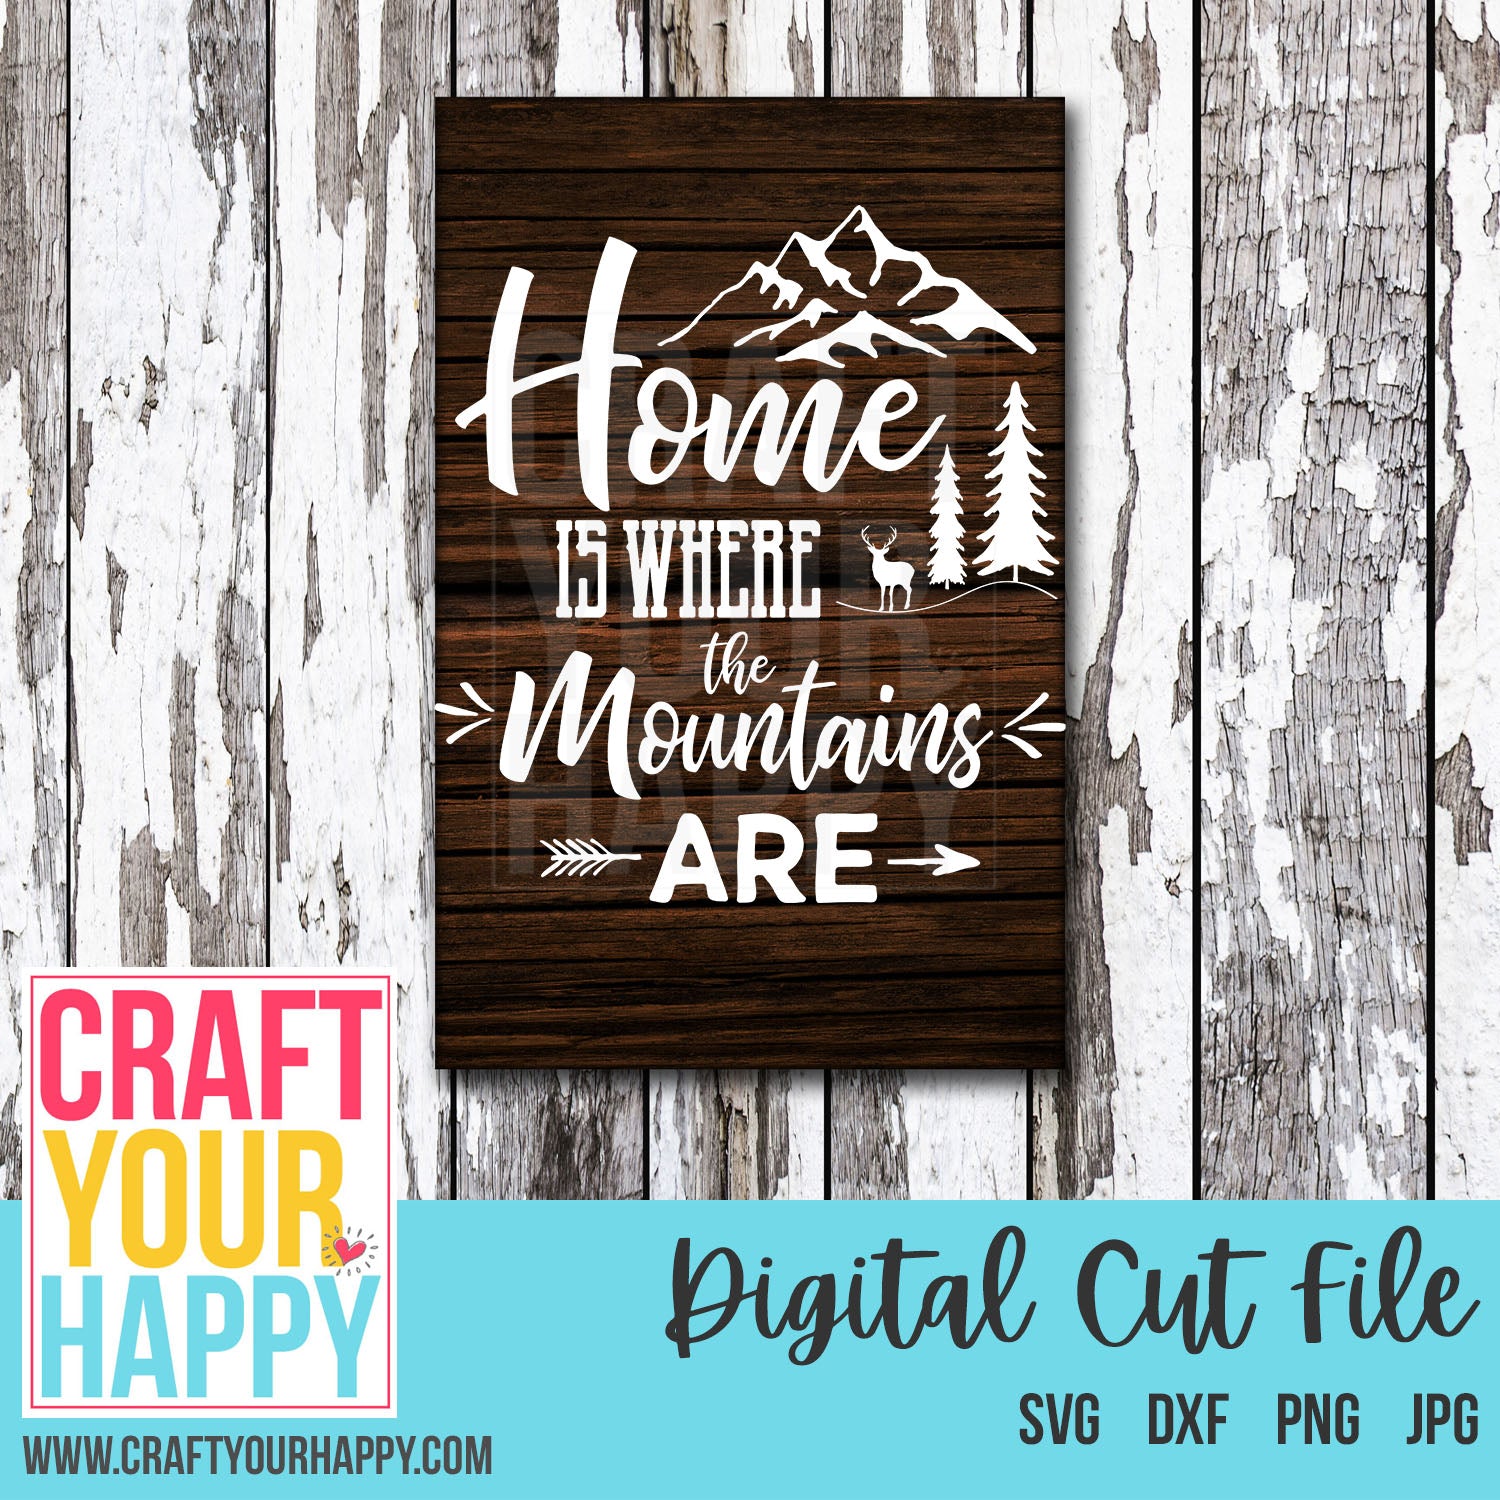 Download Mountains SVG Cut File - Home Is Where The Mountains Are ...